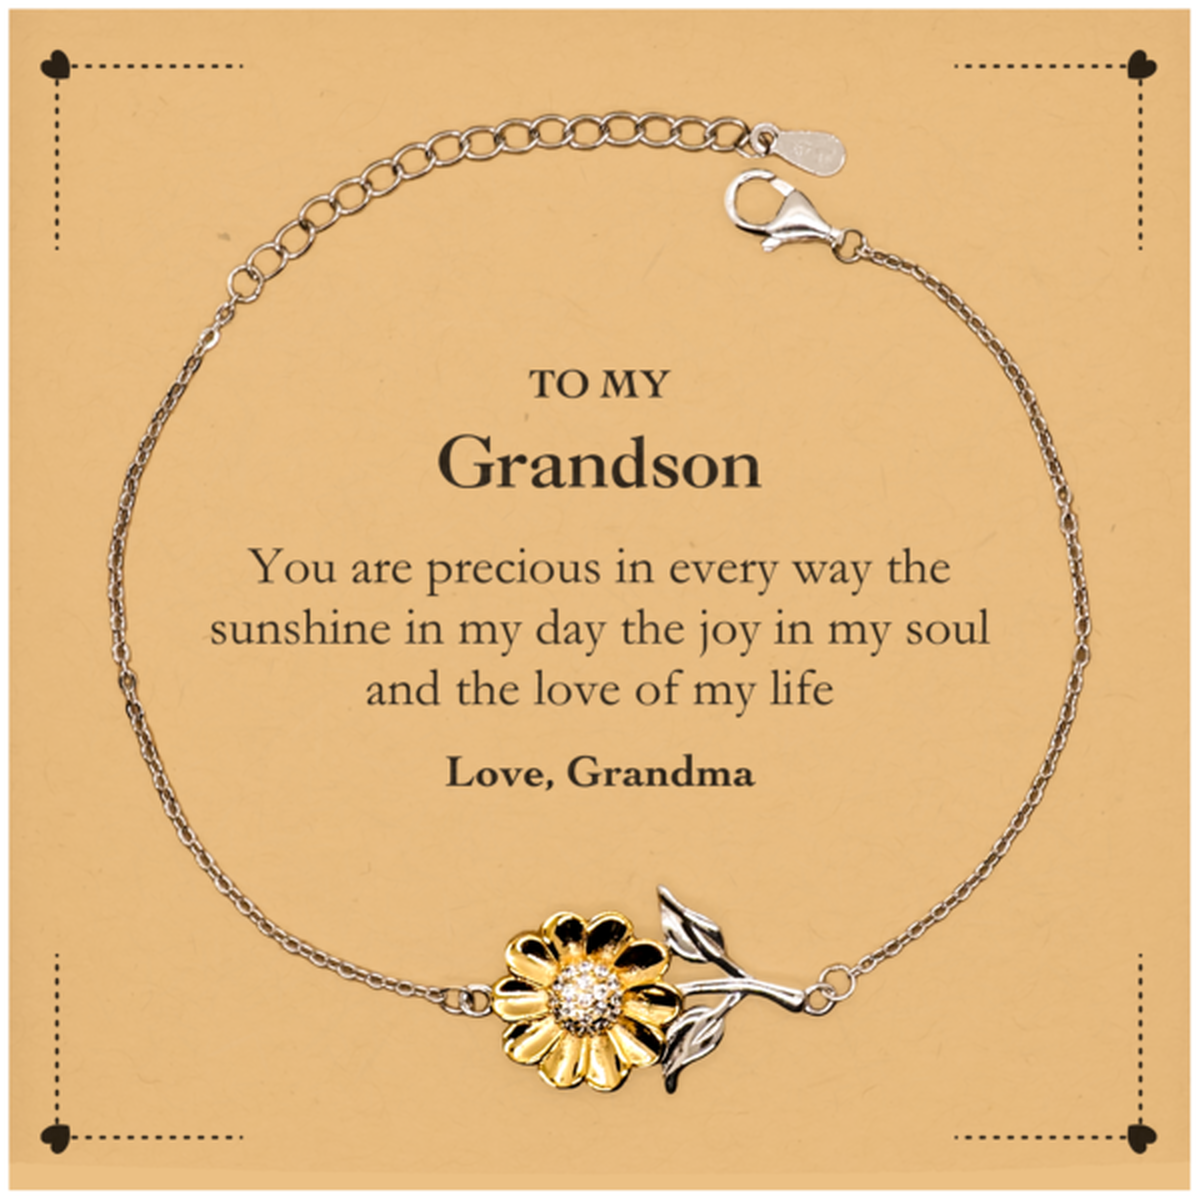 Graduation Gifts for Grandson Sunflower Bracelet Present from Grandma, Christmas Grandson Birthday Gifts Grandson You are precious in every way the sunshine in my day. Love, Grandma